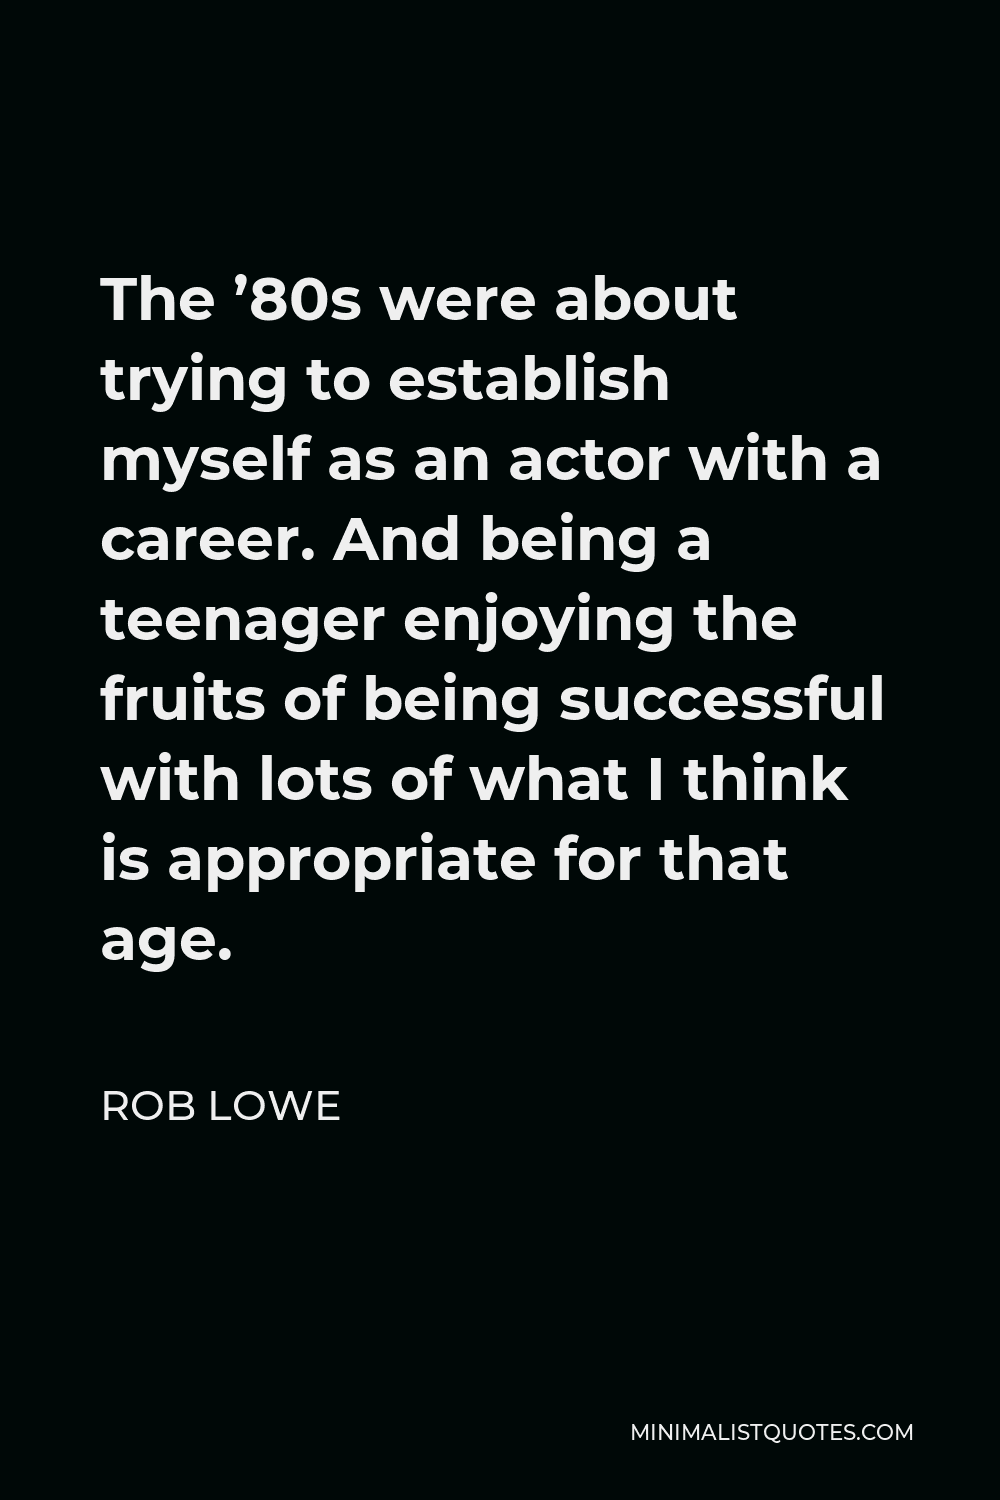 Rob Lowe Quote - The ’80s were about trying to establish myself as an actor with a career. And being a teenager enjoying the fruits of being successful with lots of what I think is appropriate for that age.